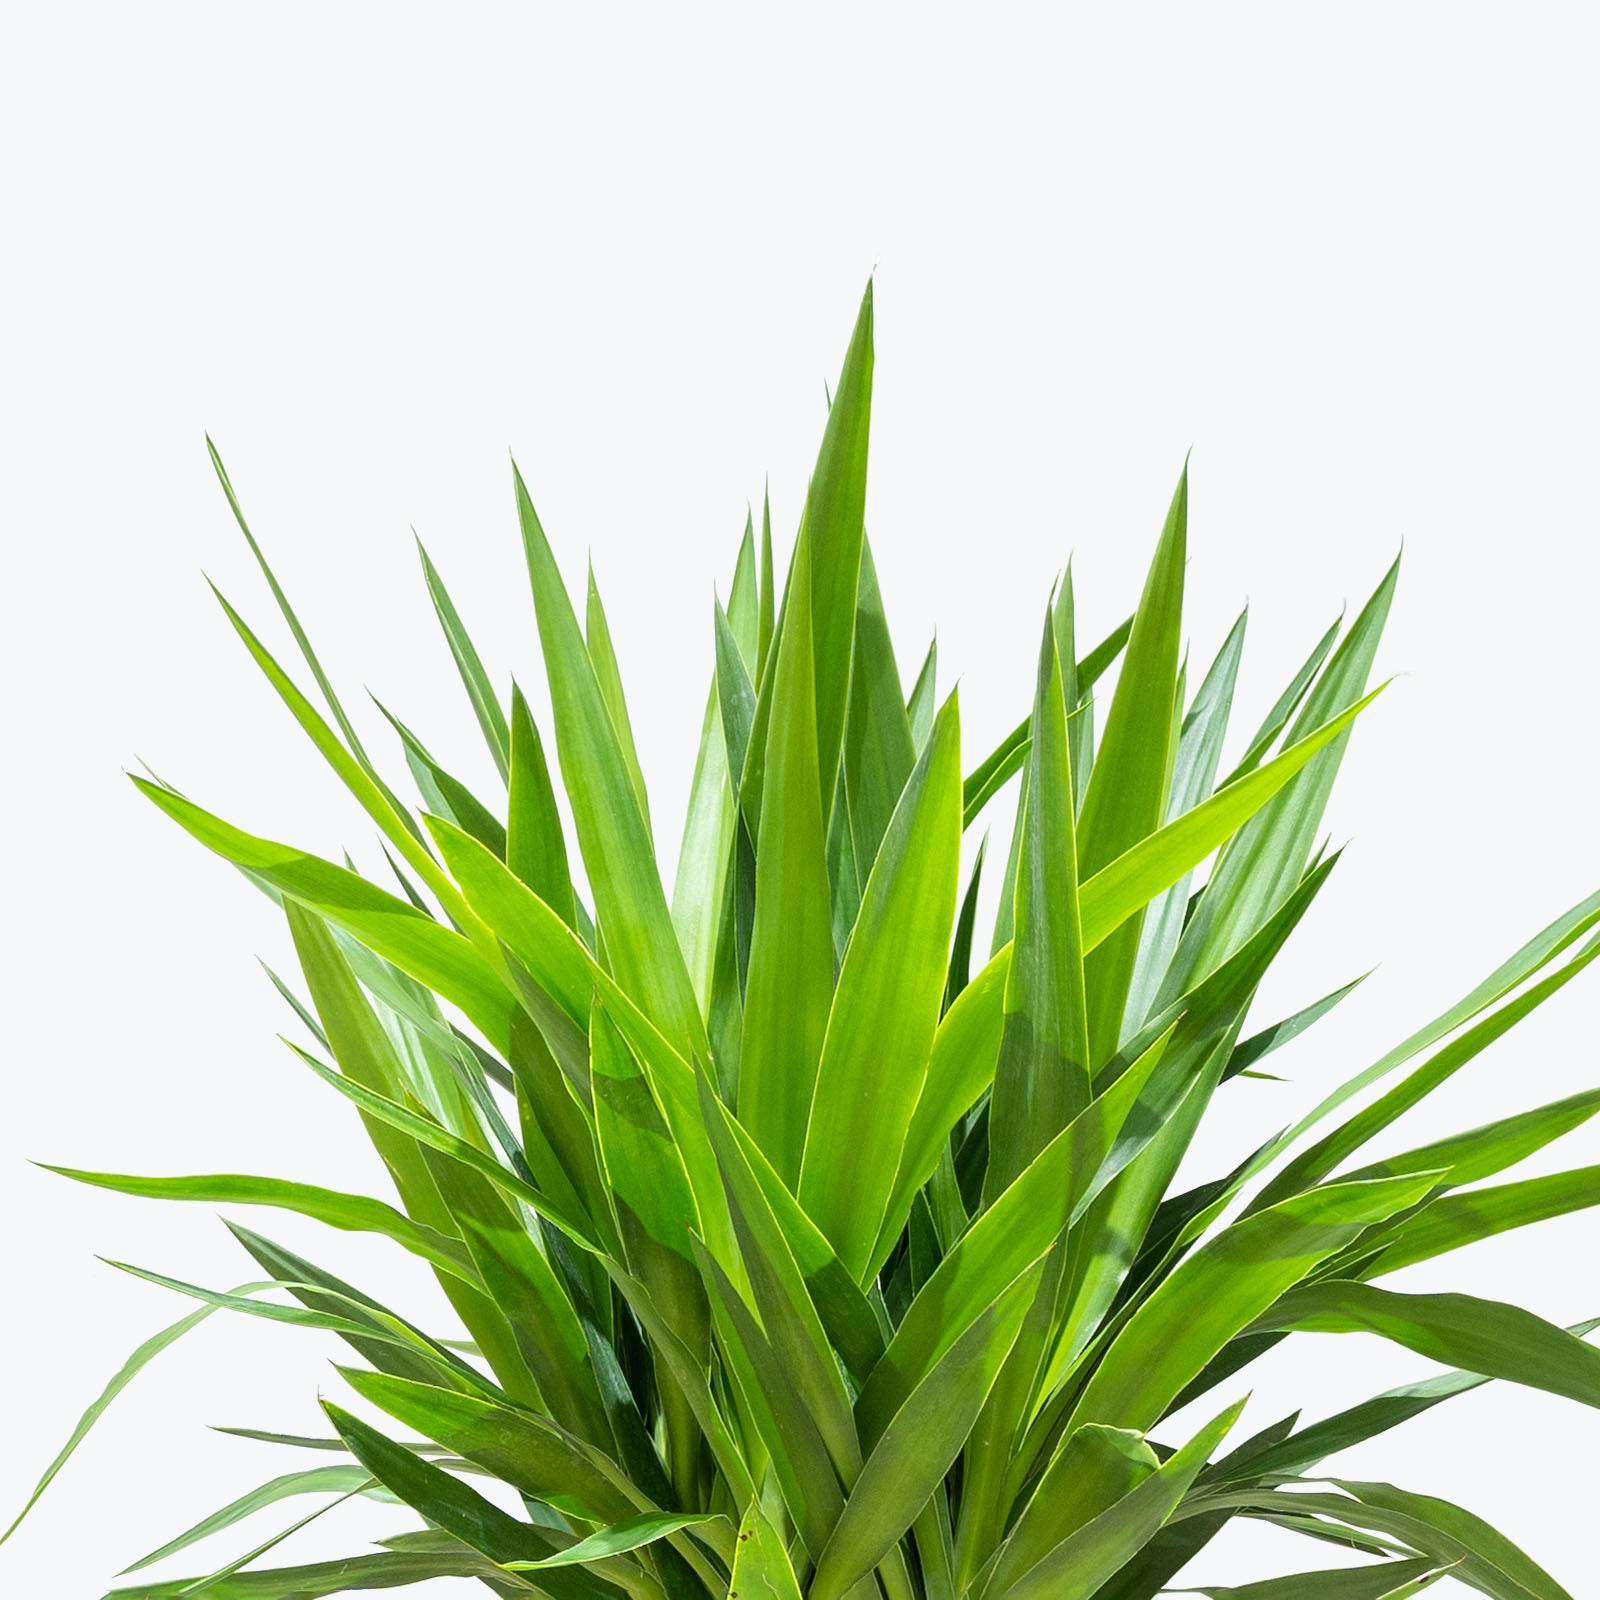 Yucca Cane | Care Guide and Pro Tips - Delivery from Toronto across Canada - JOMO Studio